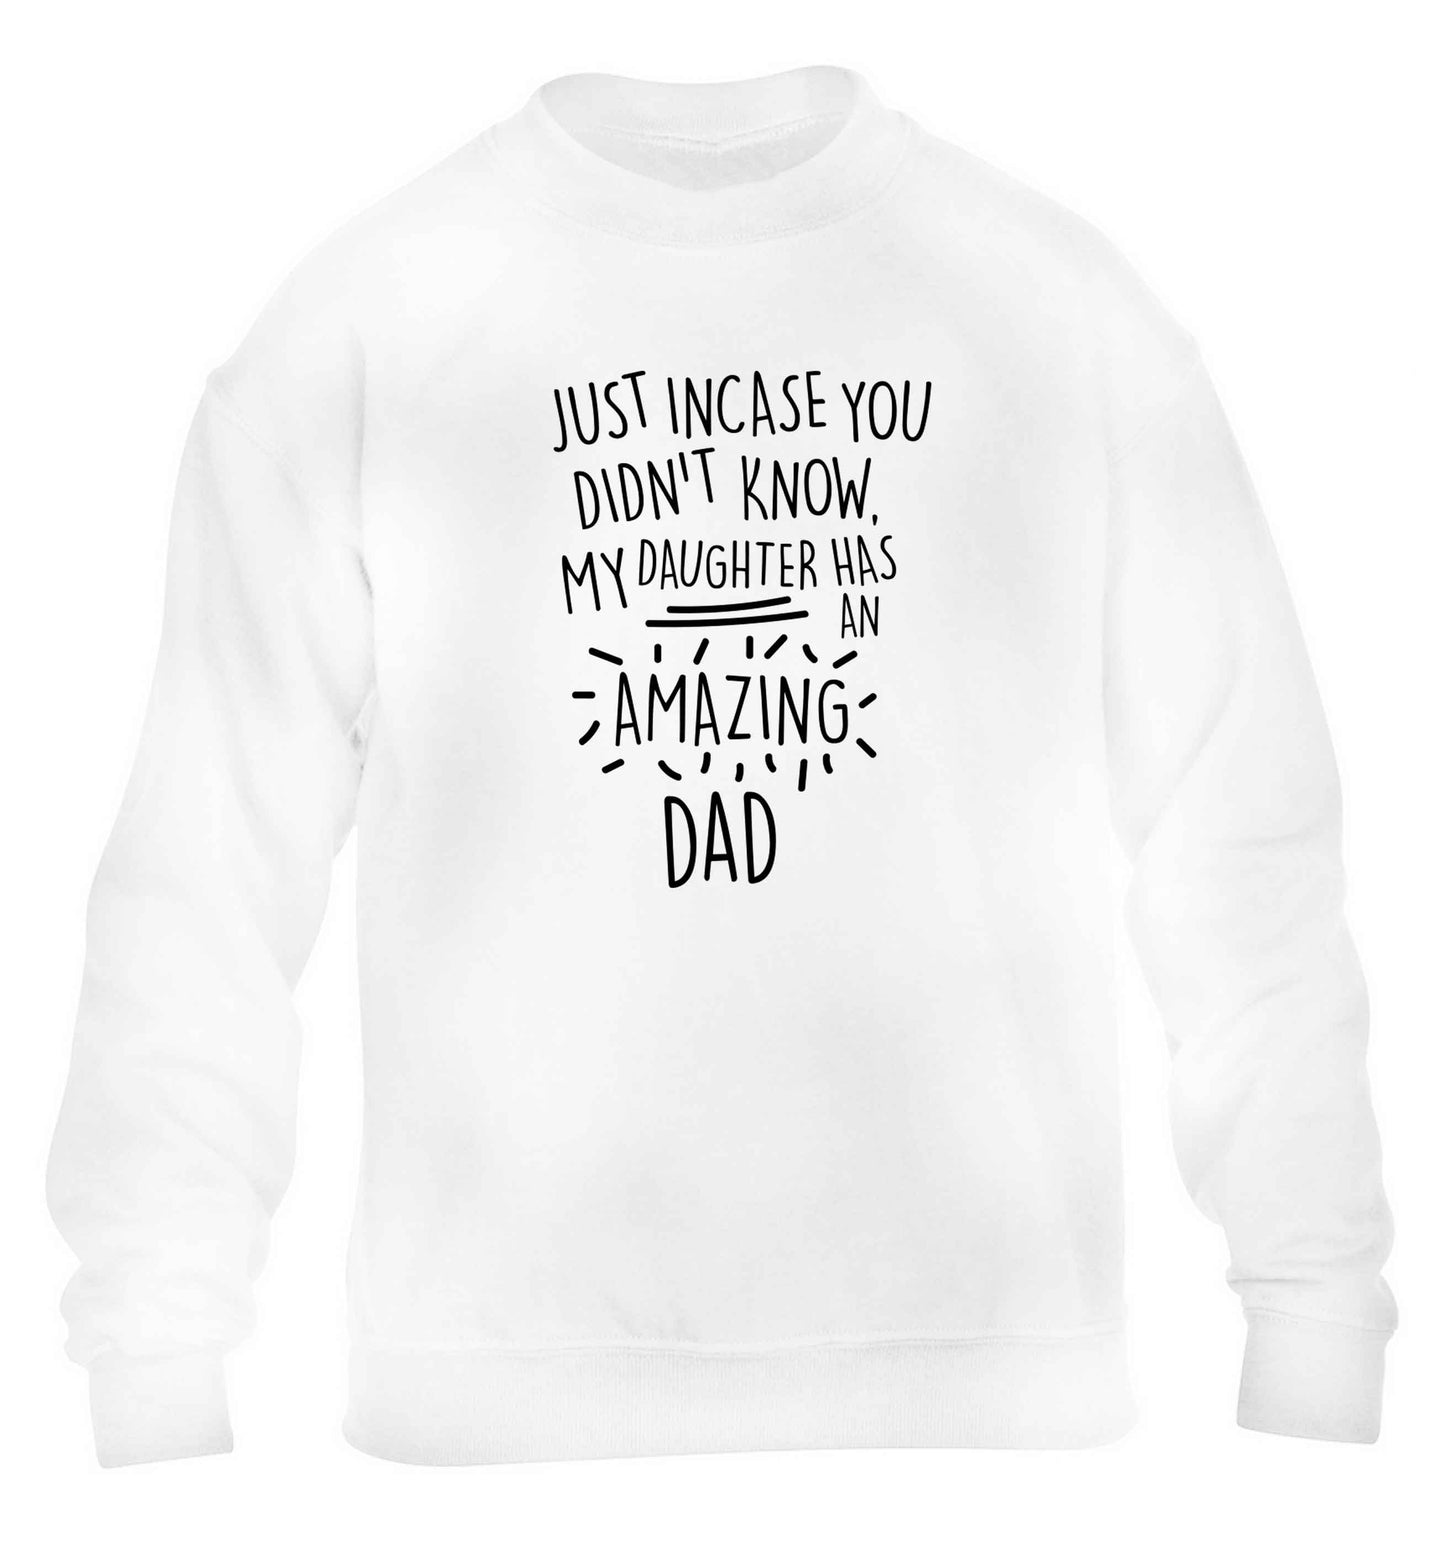 Just incase you didn't know my daughter has an amazing dad children's white sweater 12-13 Years